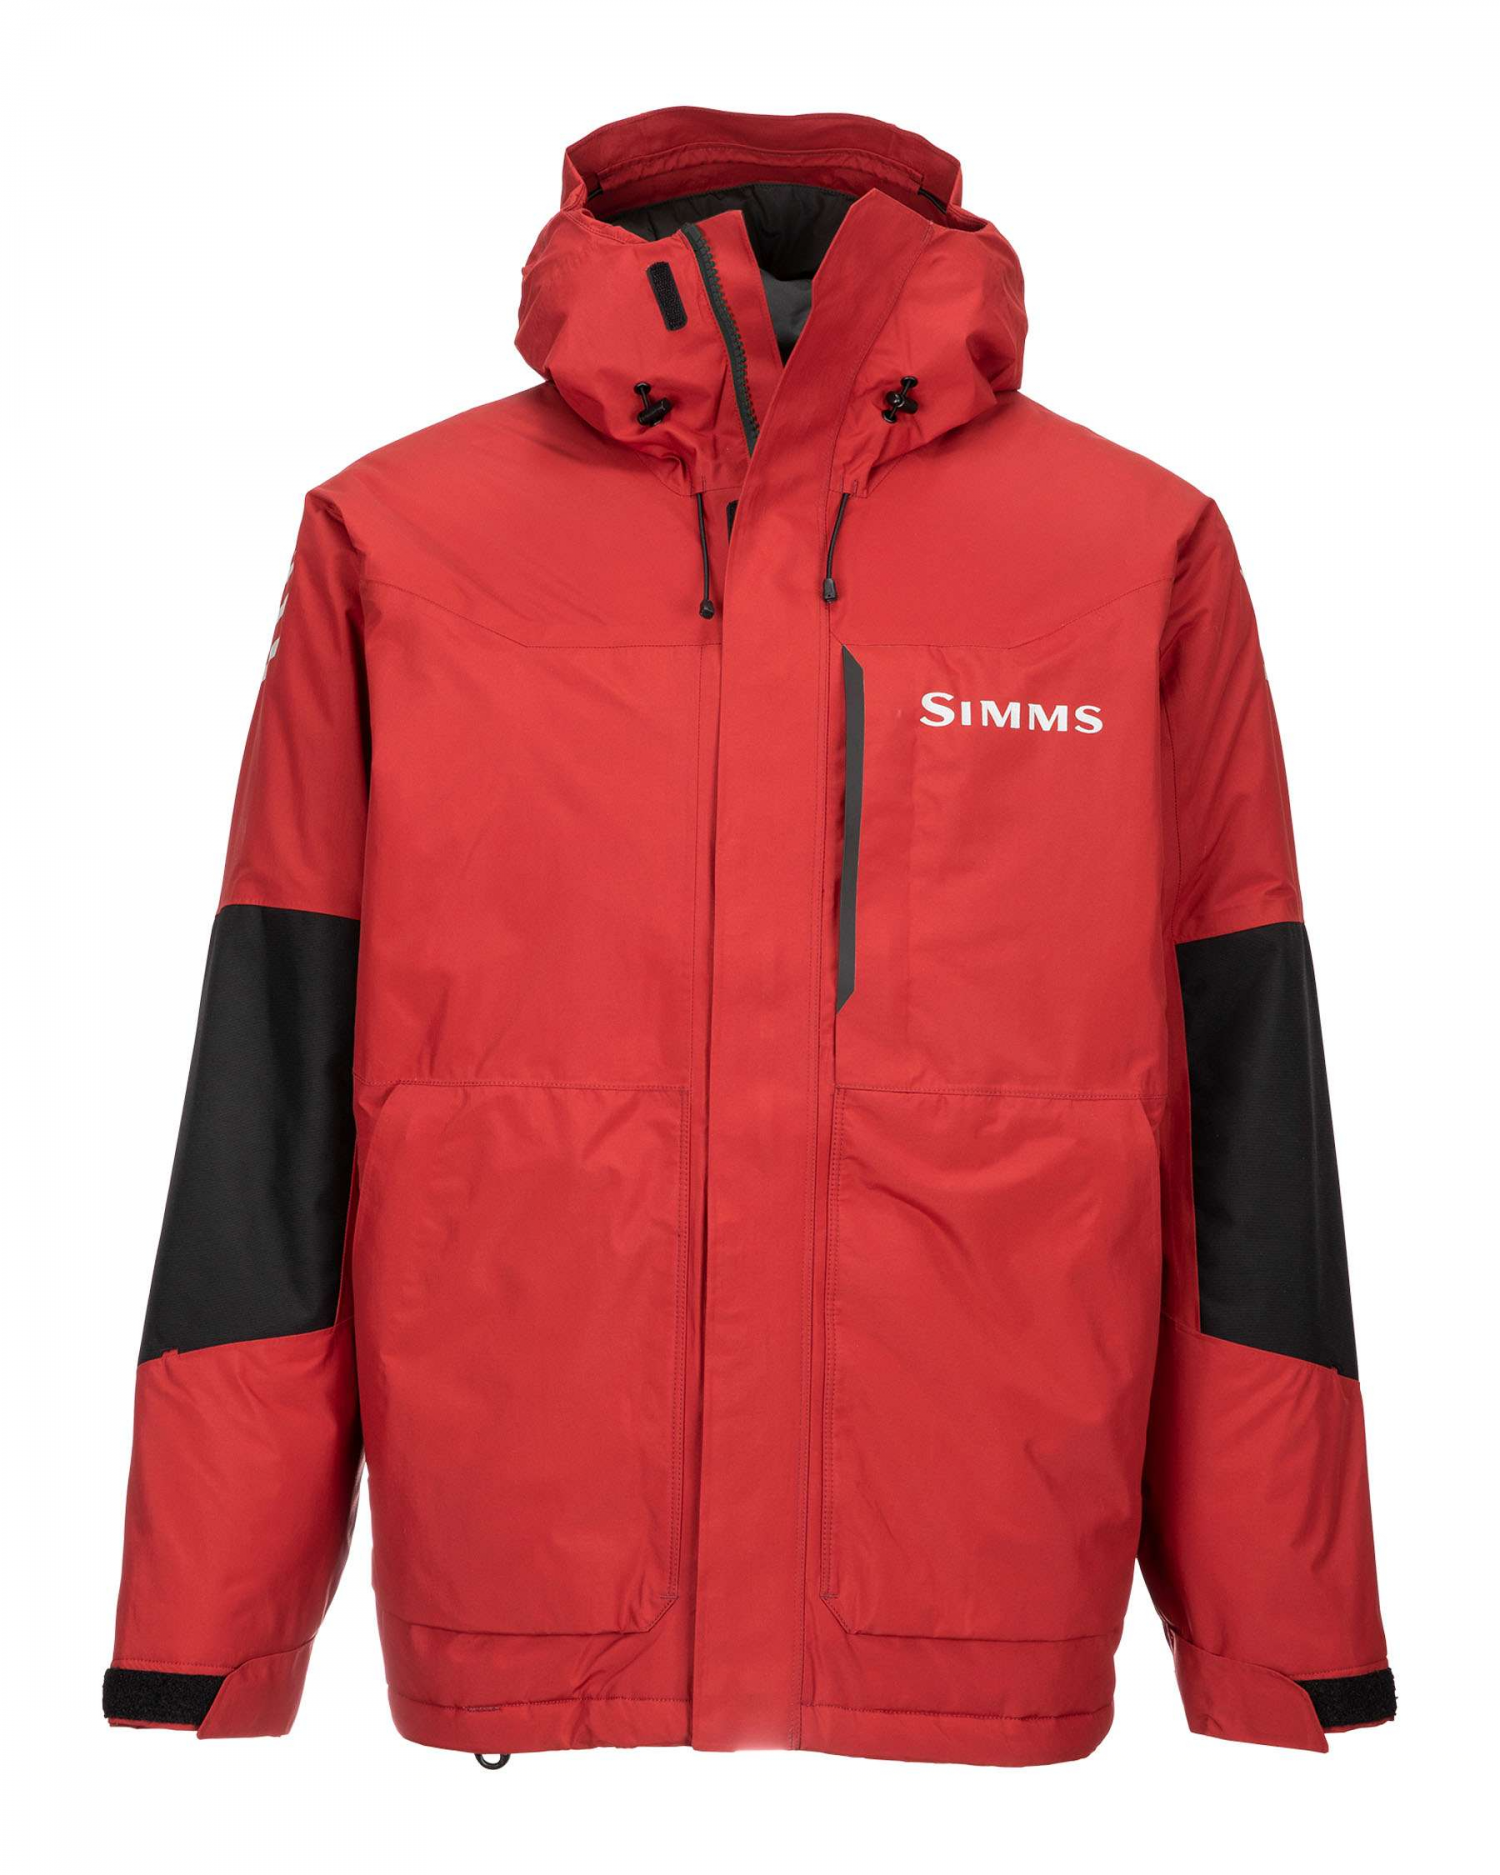 Куртка Simms Challenger Insulated Jacket '20 2XL Auburn Red куртка simms challenger jacket 20 2xl flame